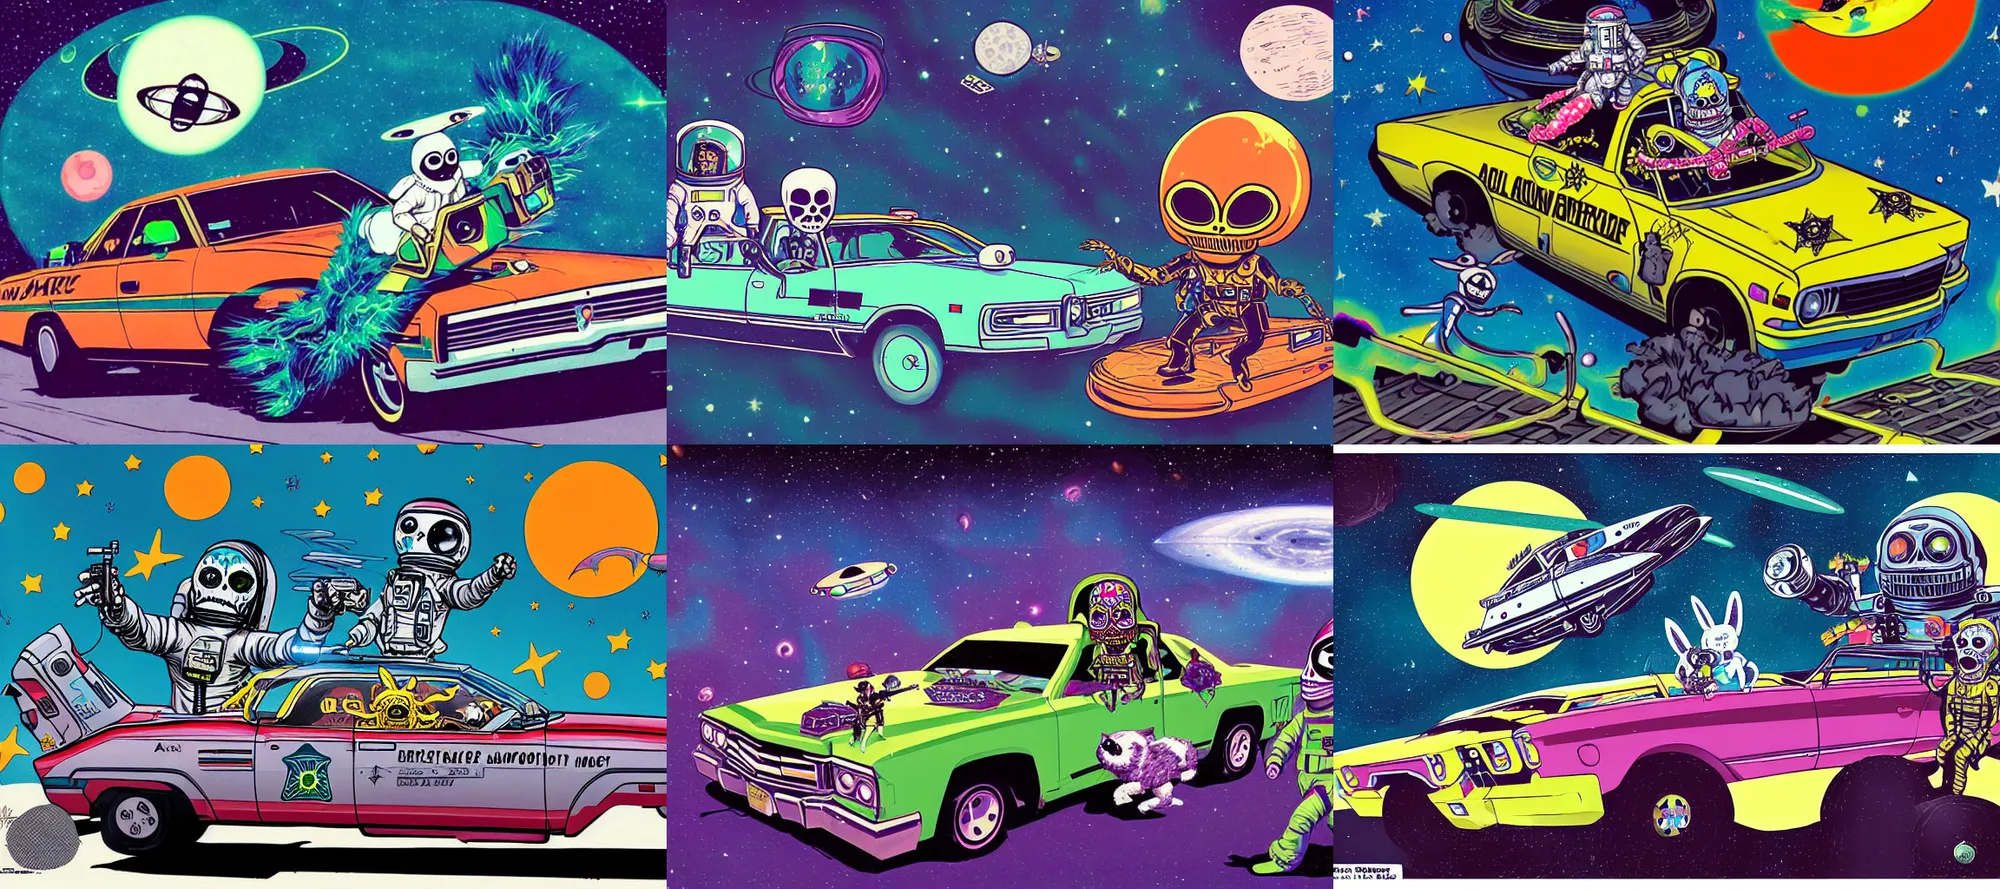 Prompt: an evil alien astronaut dress as a border patrol officer is chasing an amc marlin lowrider driven by cute fluffy dia de los muertos bunny entering a quantum wormhole, juxtapoz, heavy metal magazine, mad magazine, matte sharp painting